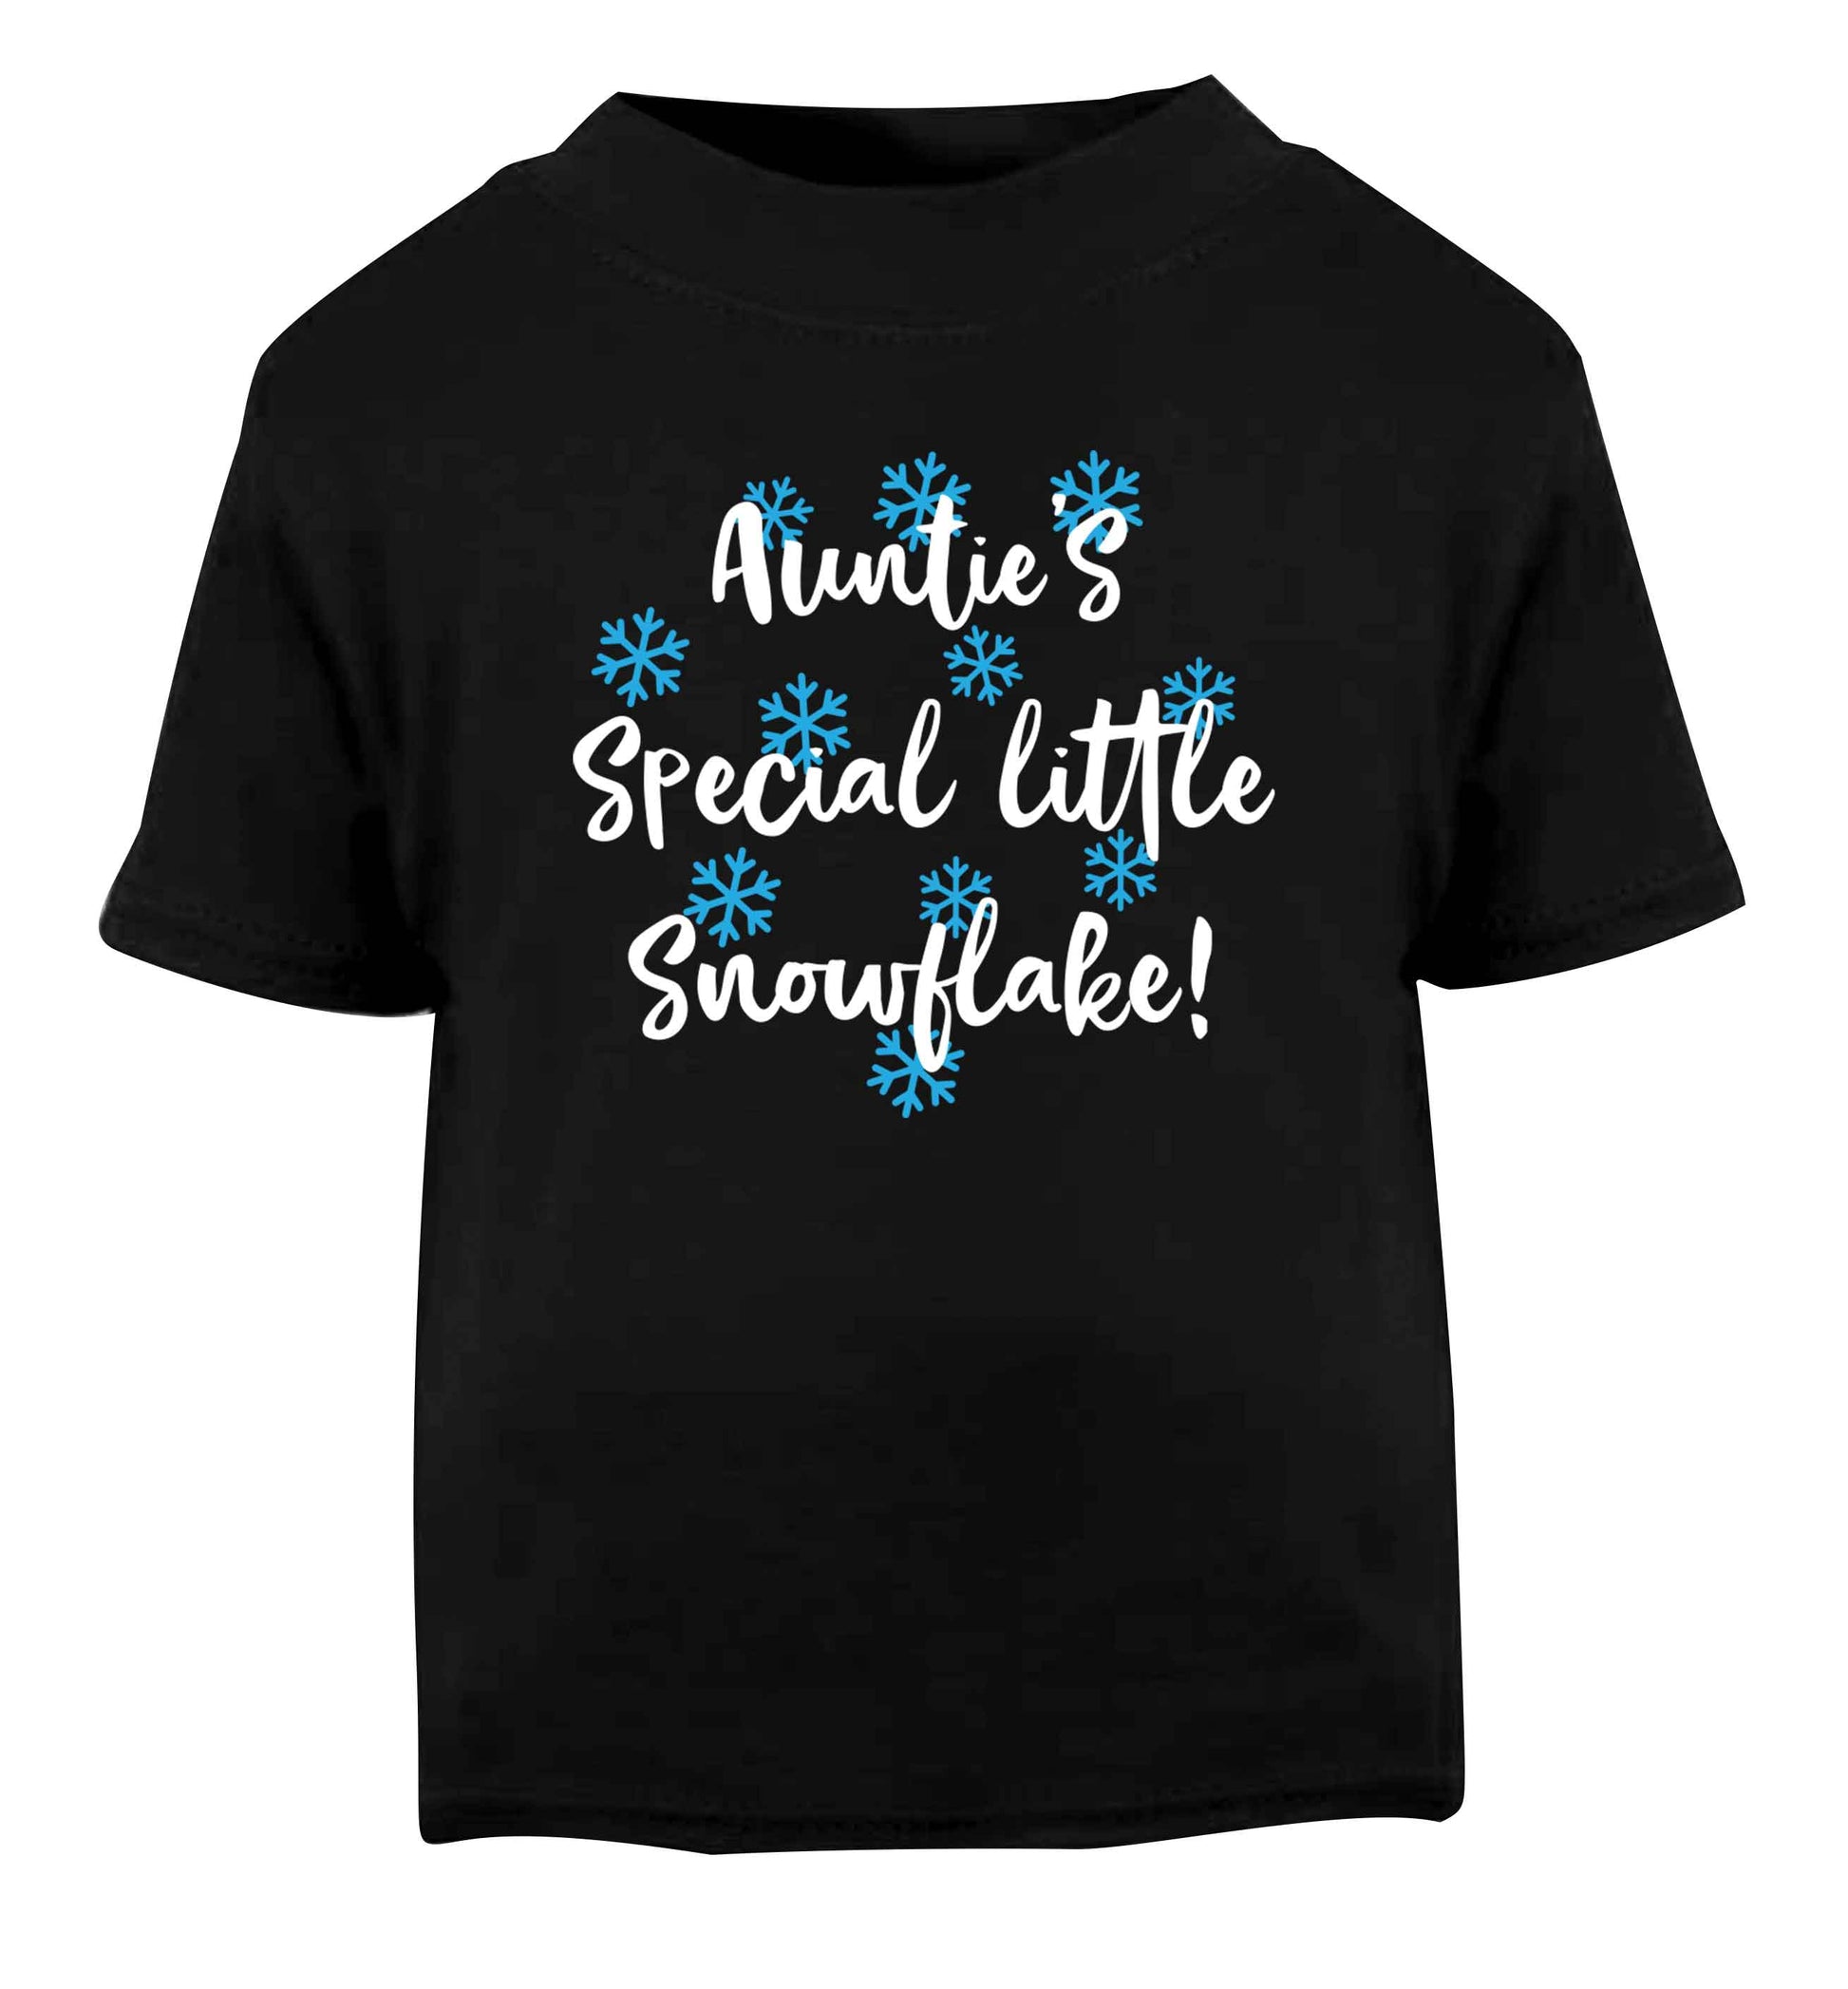 Auntie's special little snowflake Black Baby Toddler Tshirt 2 years